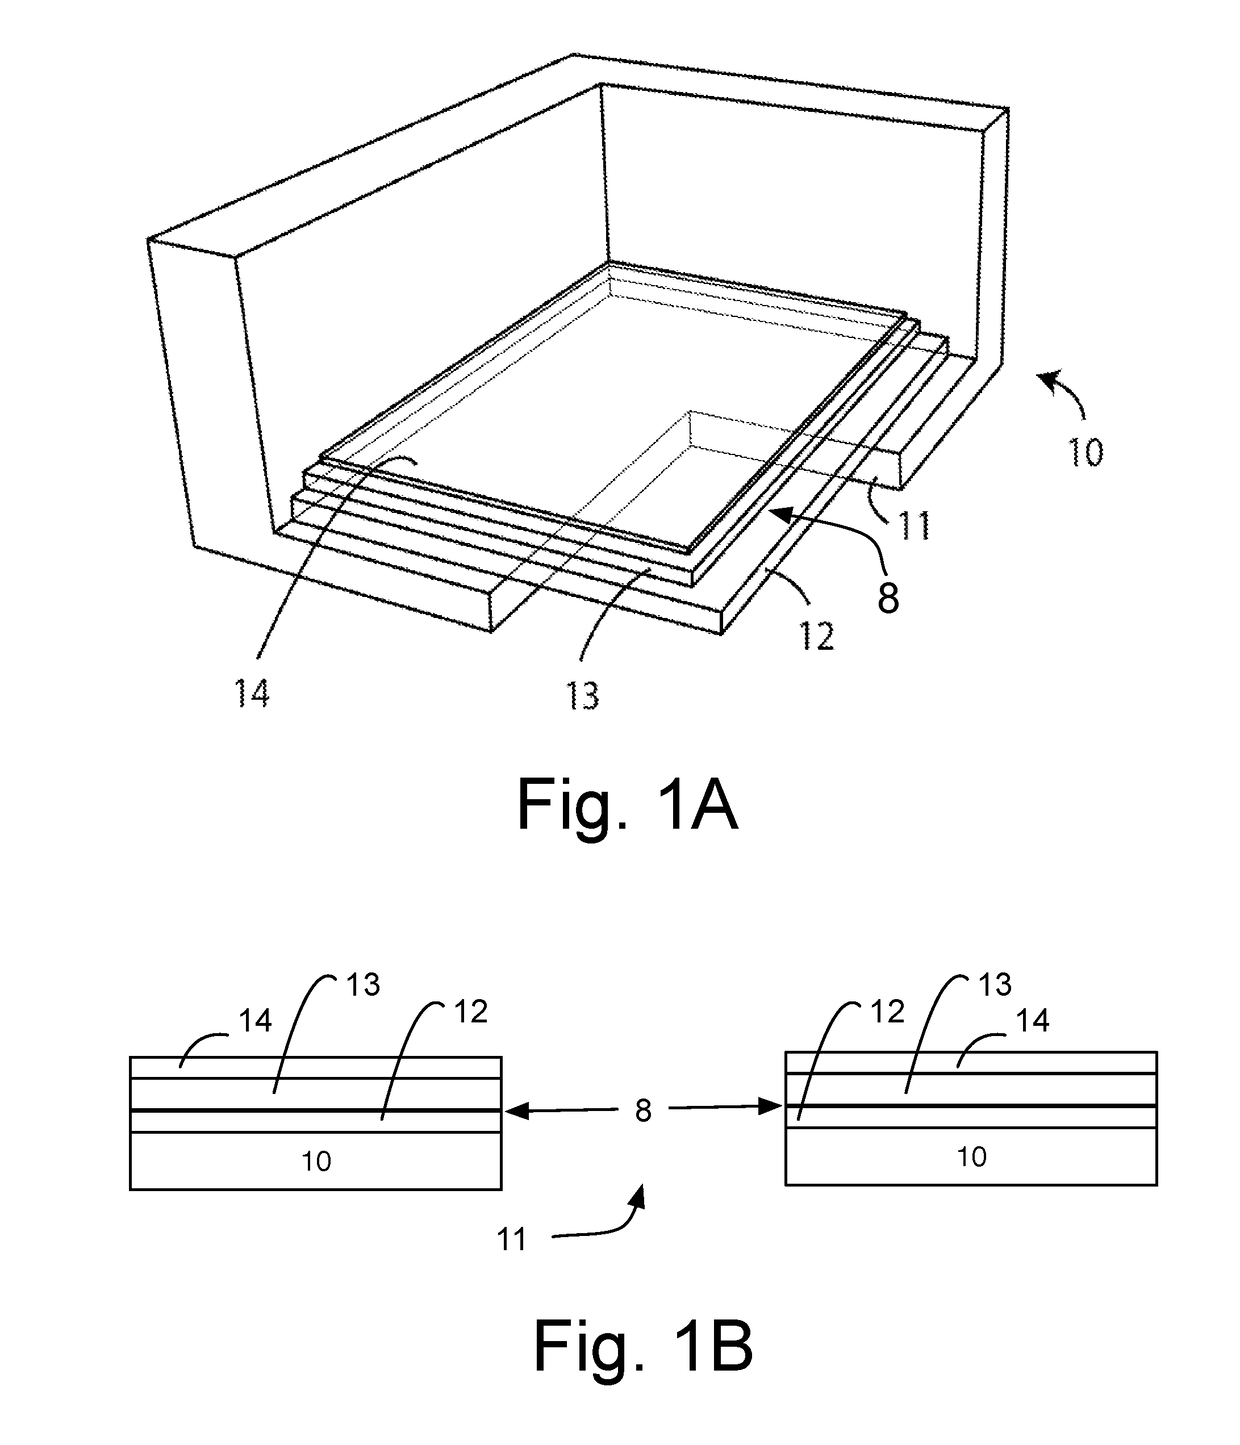 Method and apparatus for photo-curing photo-sensitive materials for the formation of three-dimensional objects in a tank with a flexible, self-lubricating substratum